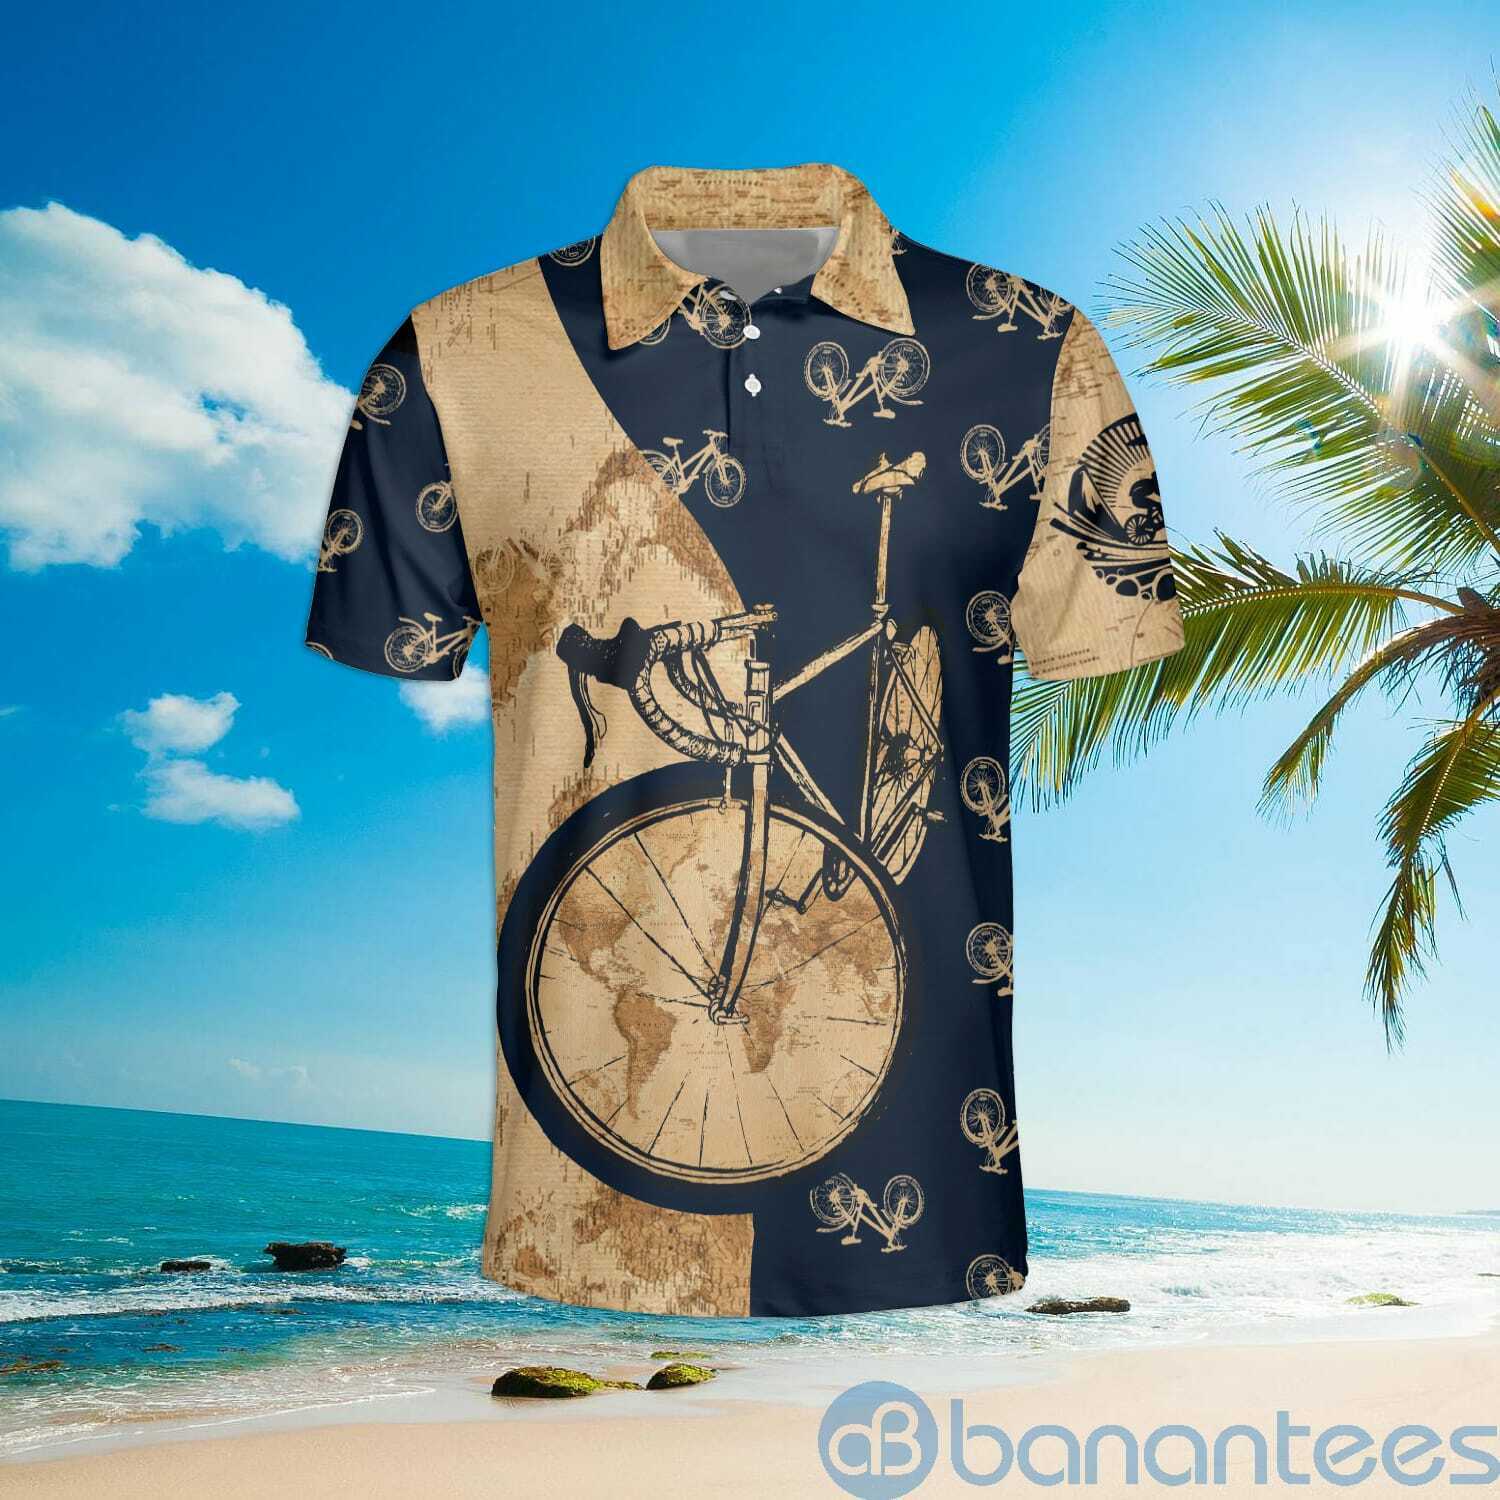 Vintage Classic Track Bicycle Art Men's Cycling Polo Shirt